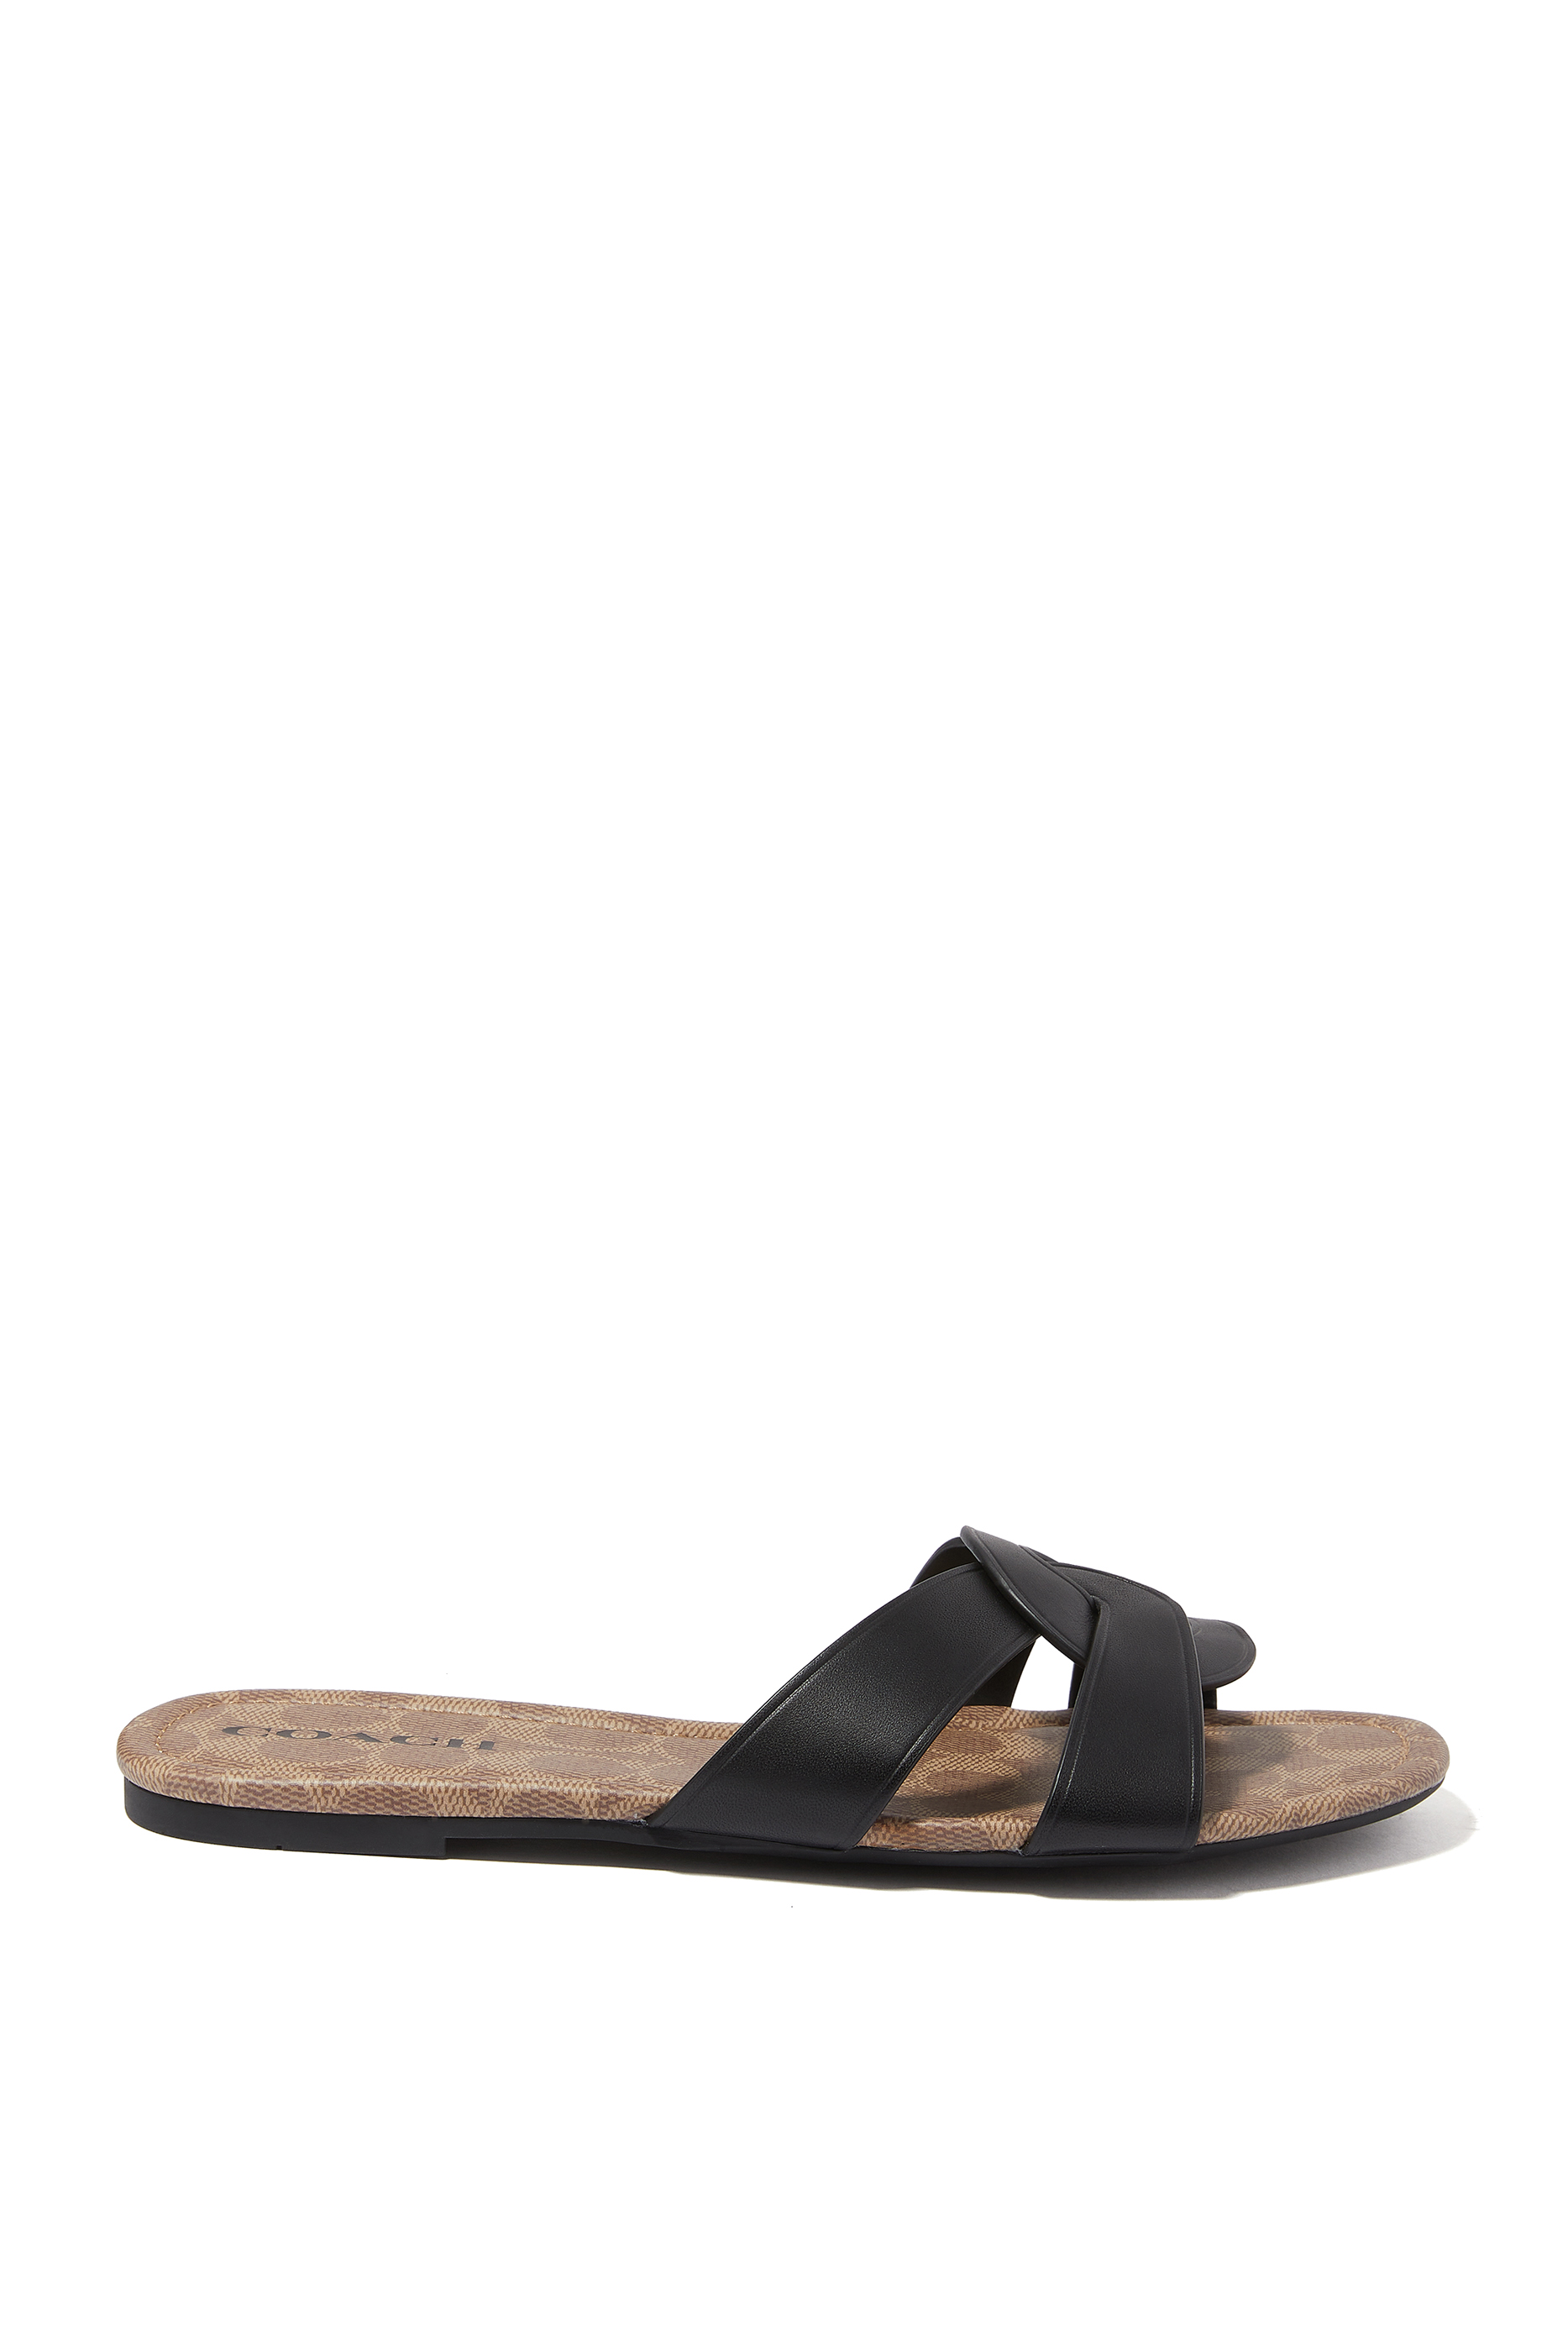 Buy Coach Essie Leather Sandals for Womens | Bloomingdale's UAE